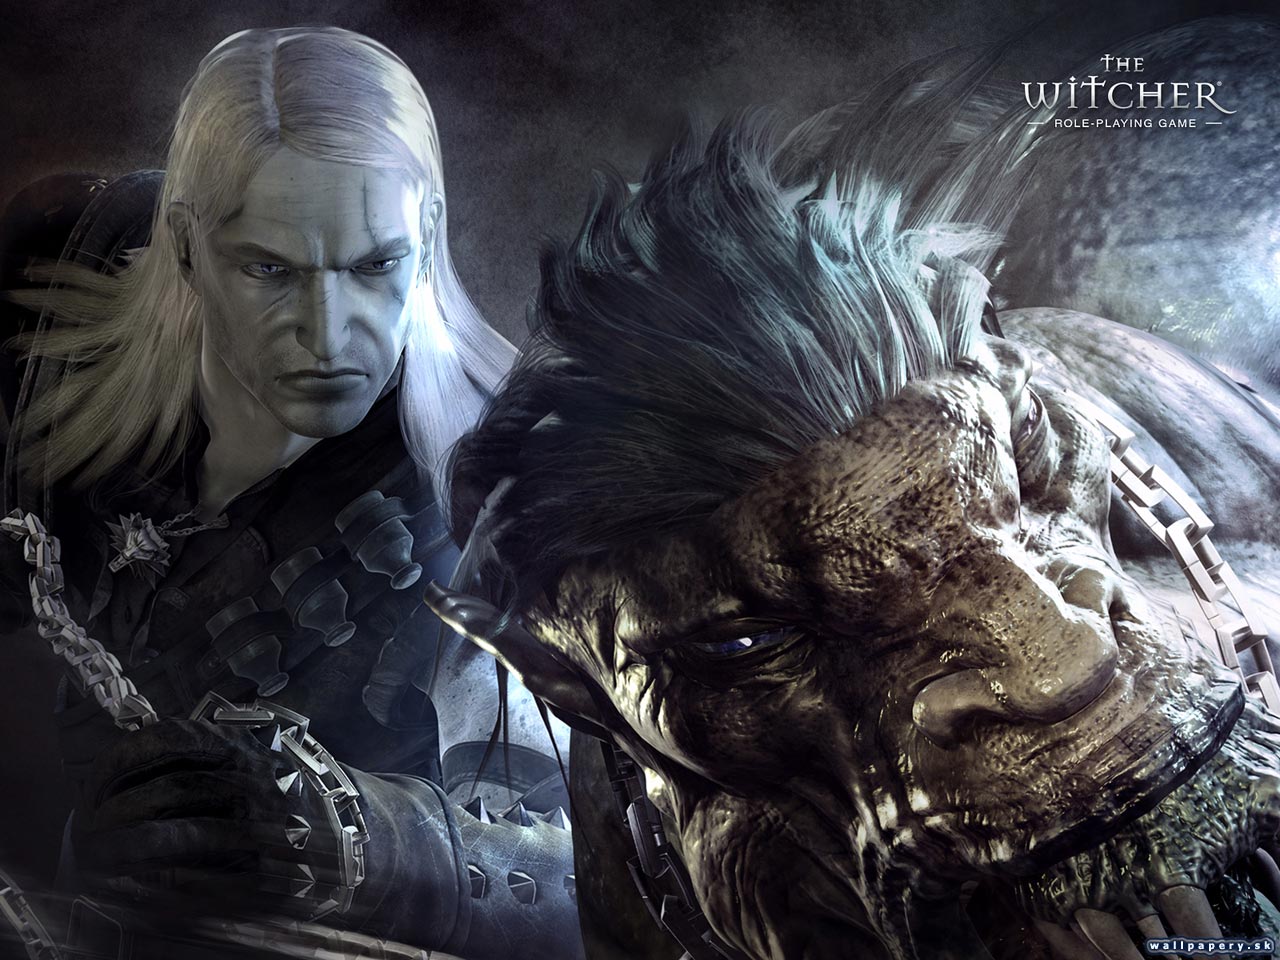 The Witcher - wallpaper 28